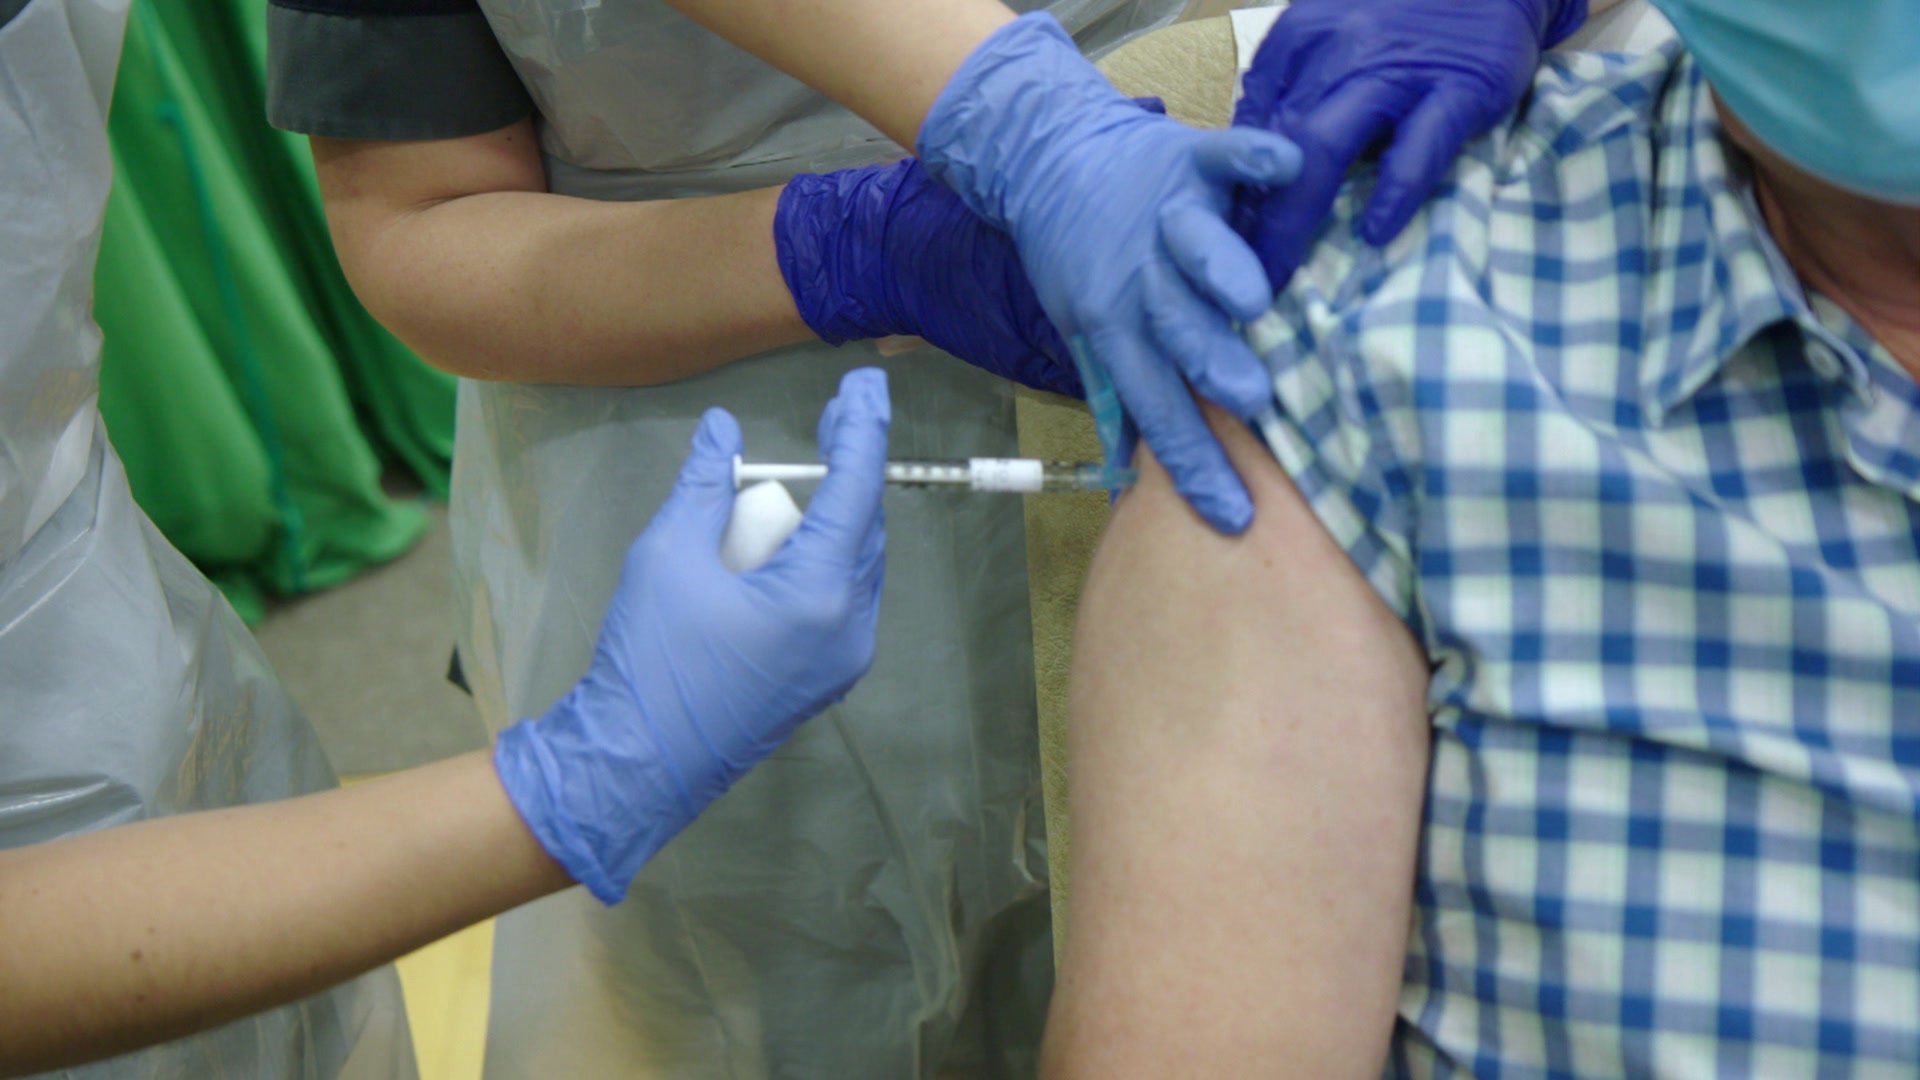 A volunteer receives the vaccine